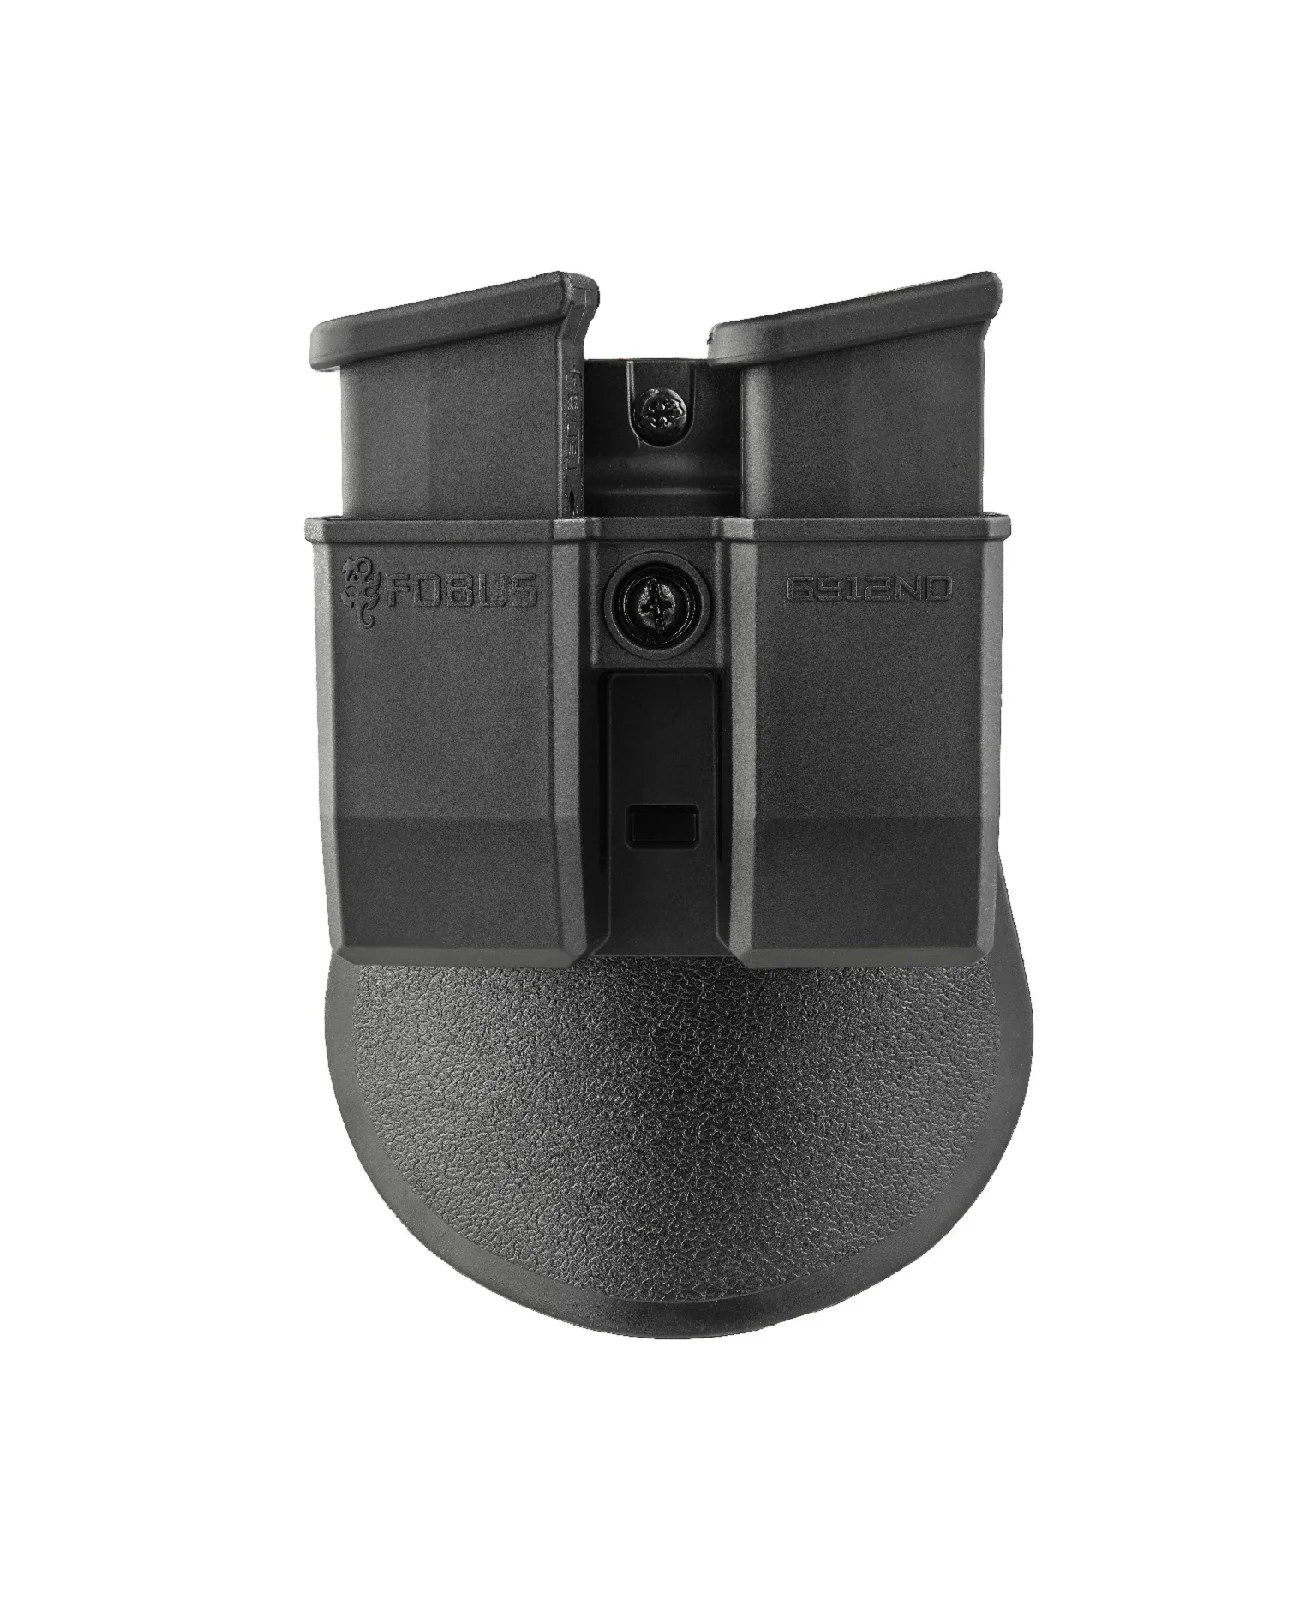 Fobus Double Magazine Pouch for Single-Stack 9mm Magazines